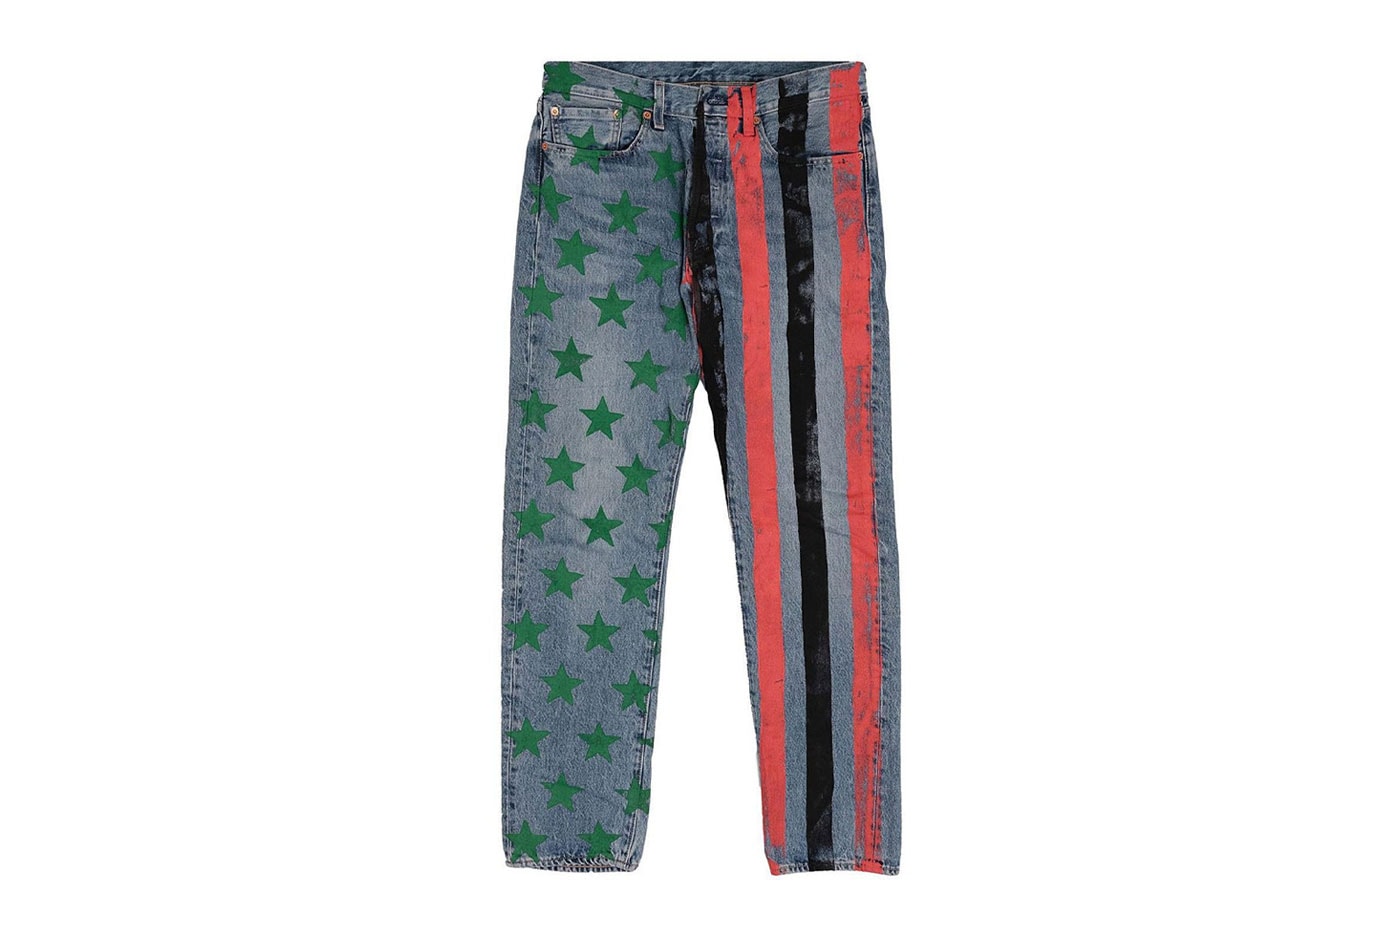 CPFM Denim Tears Jimi Hendrix Independence Day July 4 The Star-Spangled Banner Levis cactus plant flea market american flag jeans jackets green black red release info date price